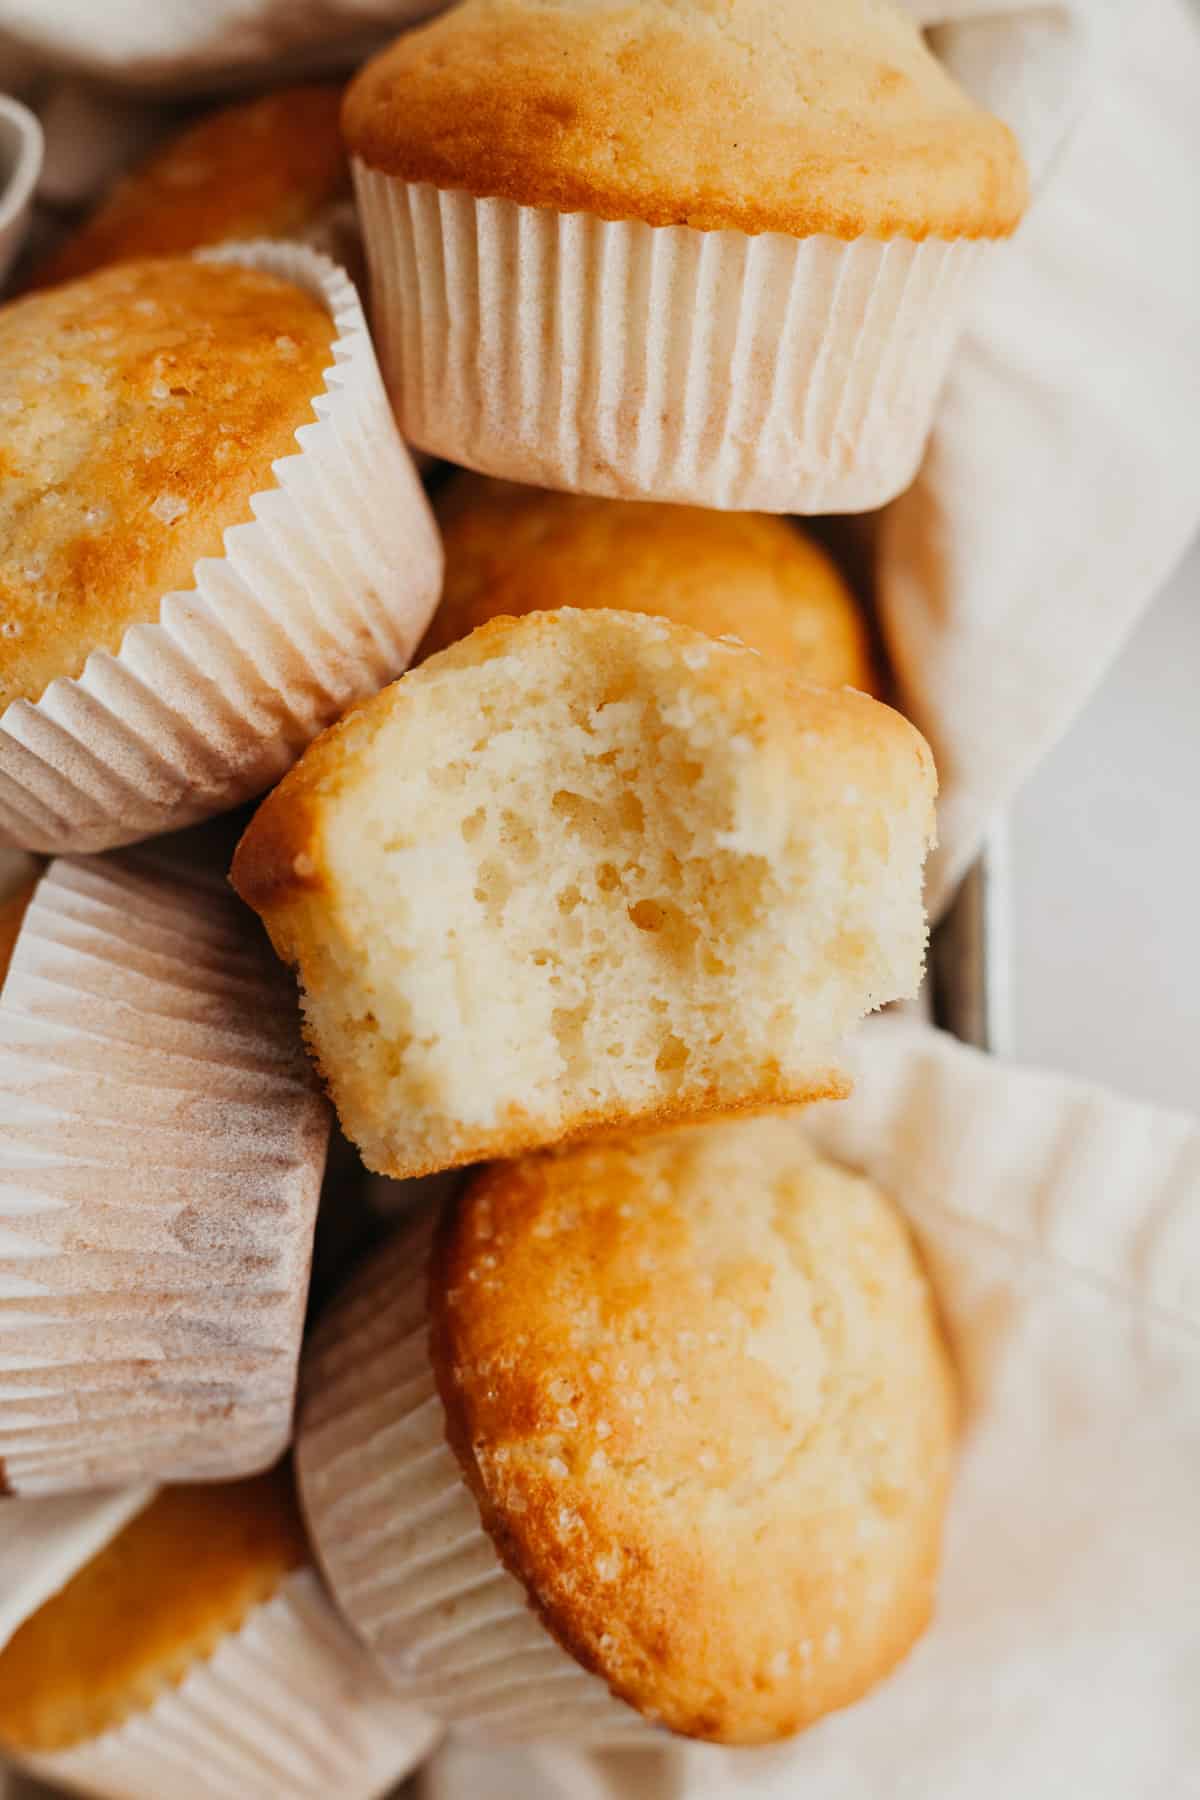 A small pile of vanilla muffins, one has a bite taken out of it.